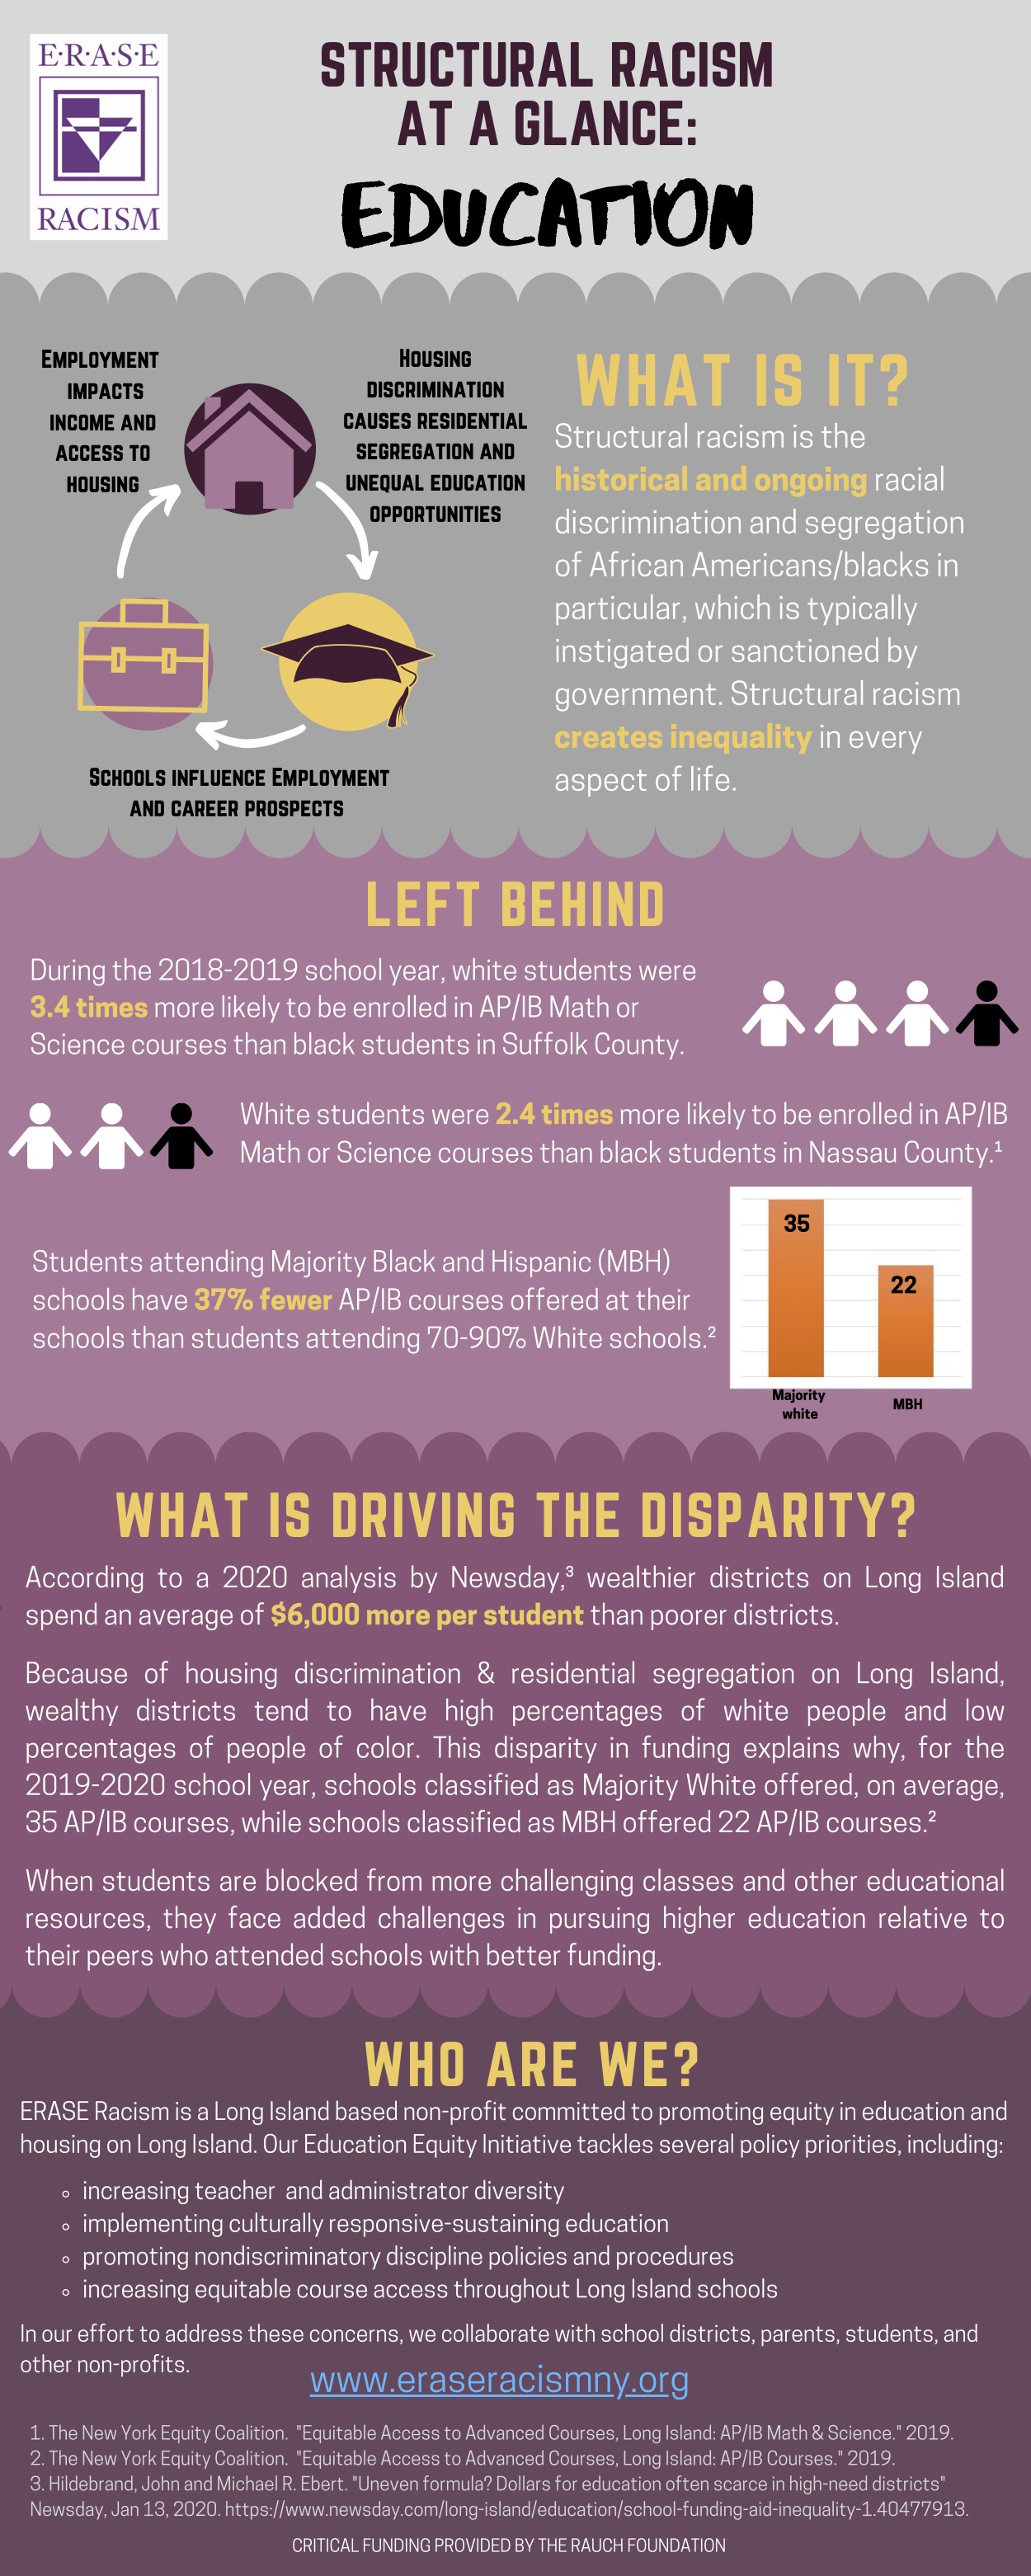 education Structural Racism at a Glance